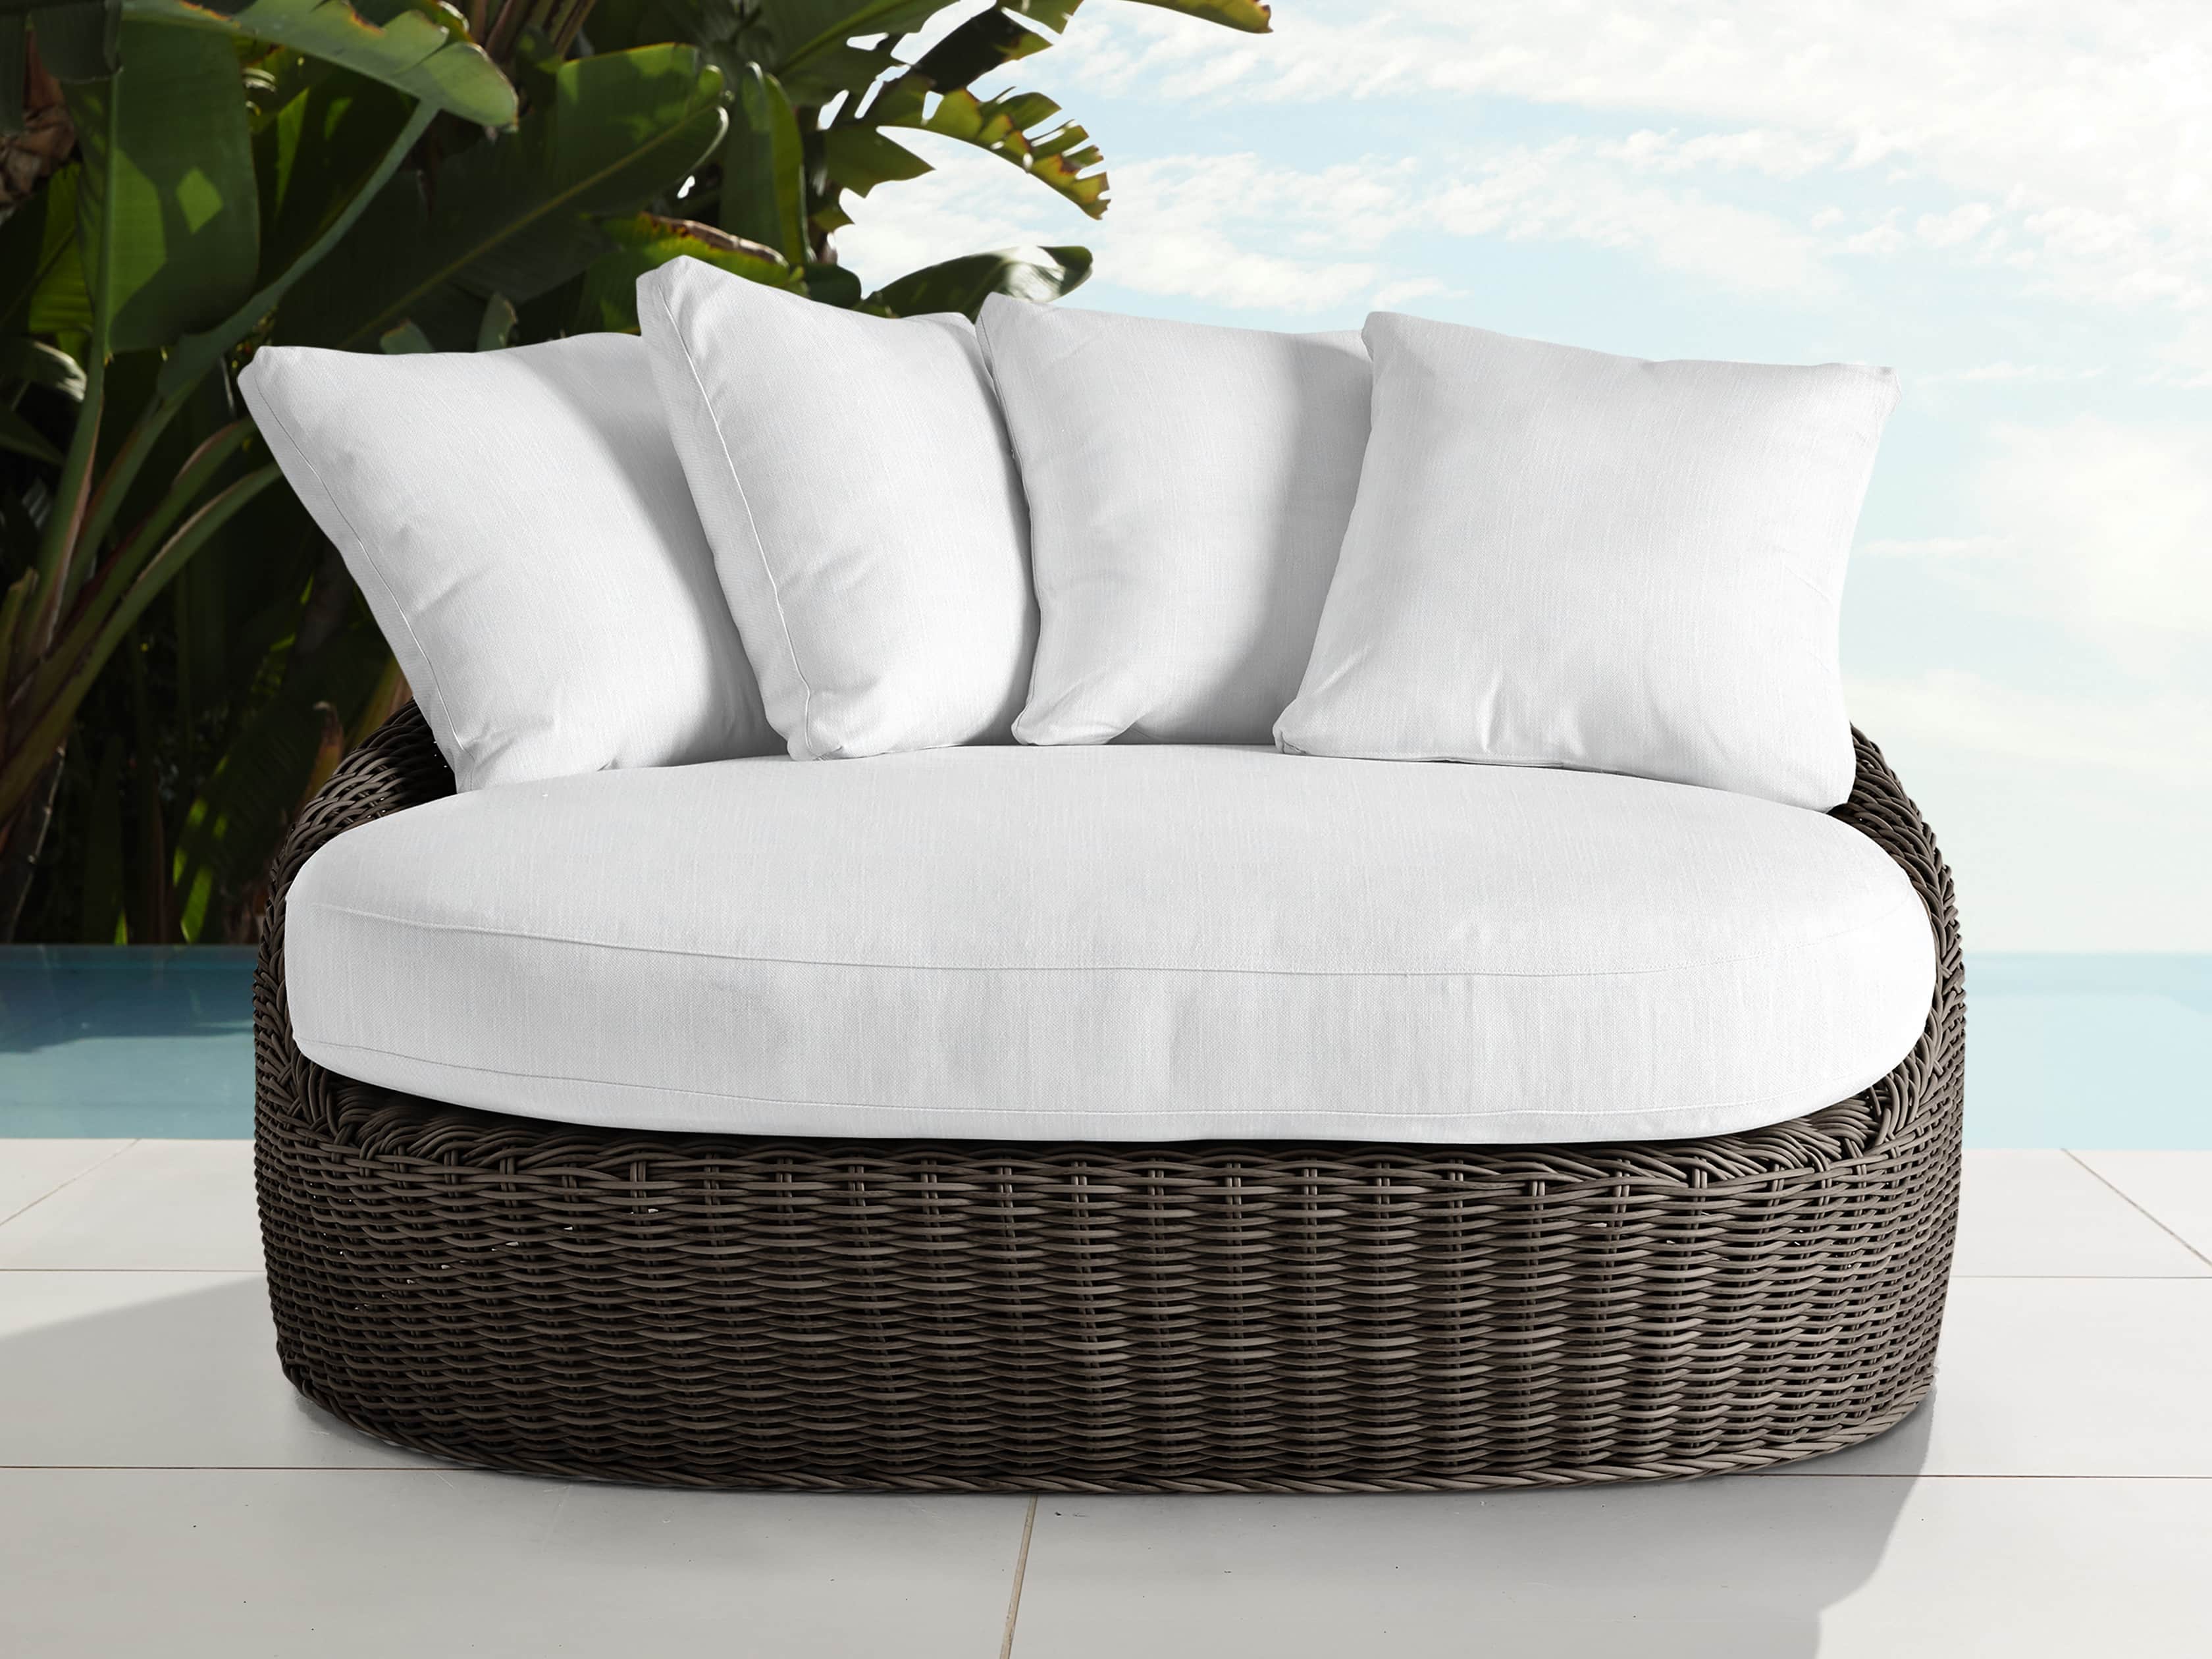 Wyatt Outdoor Daybed Lounge Arhaus, Round Outdoor Daybed Replacement Cushion